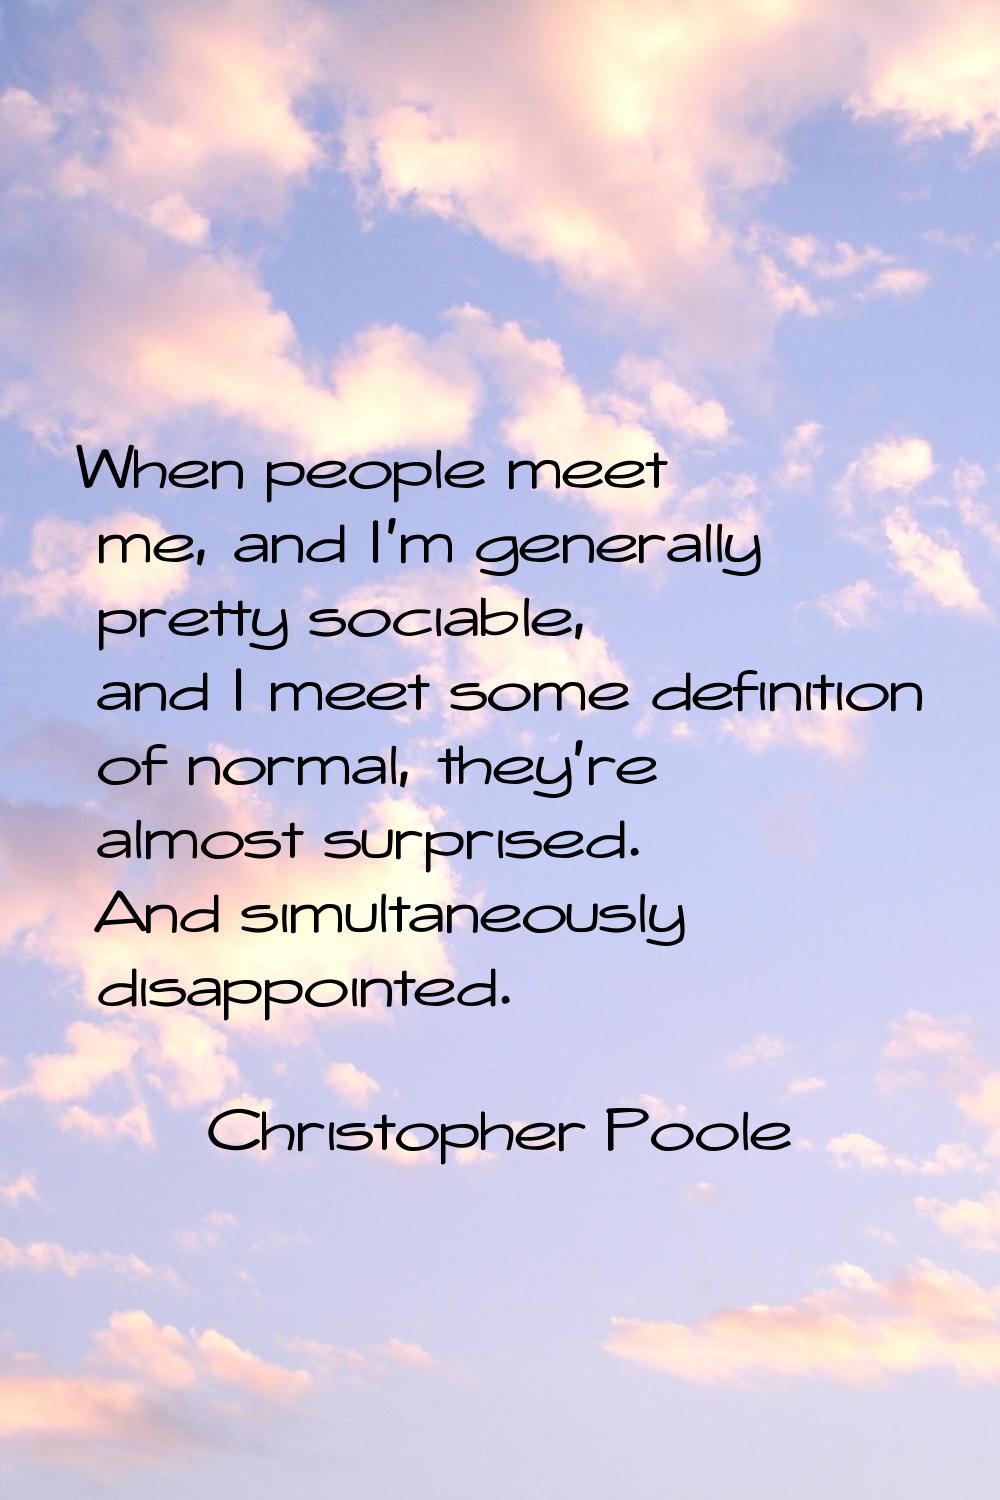 When people meet me, and I'm generally pretty sociable, and I meet some definition of normal, they'